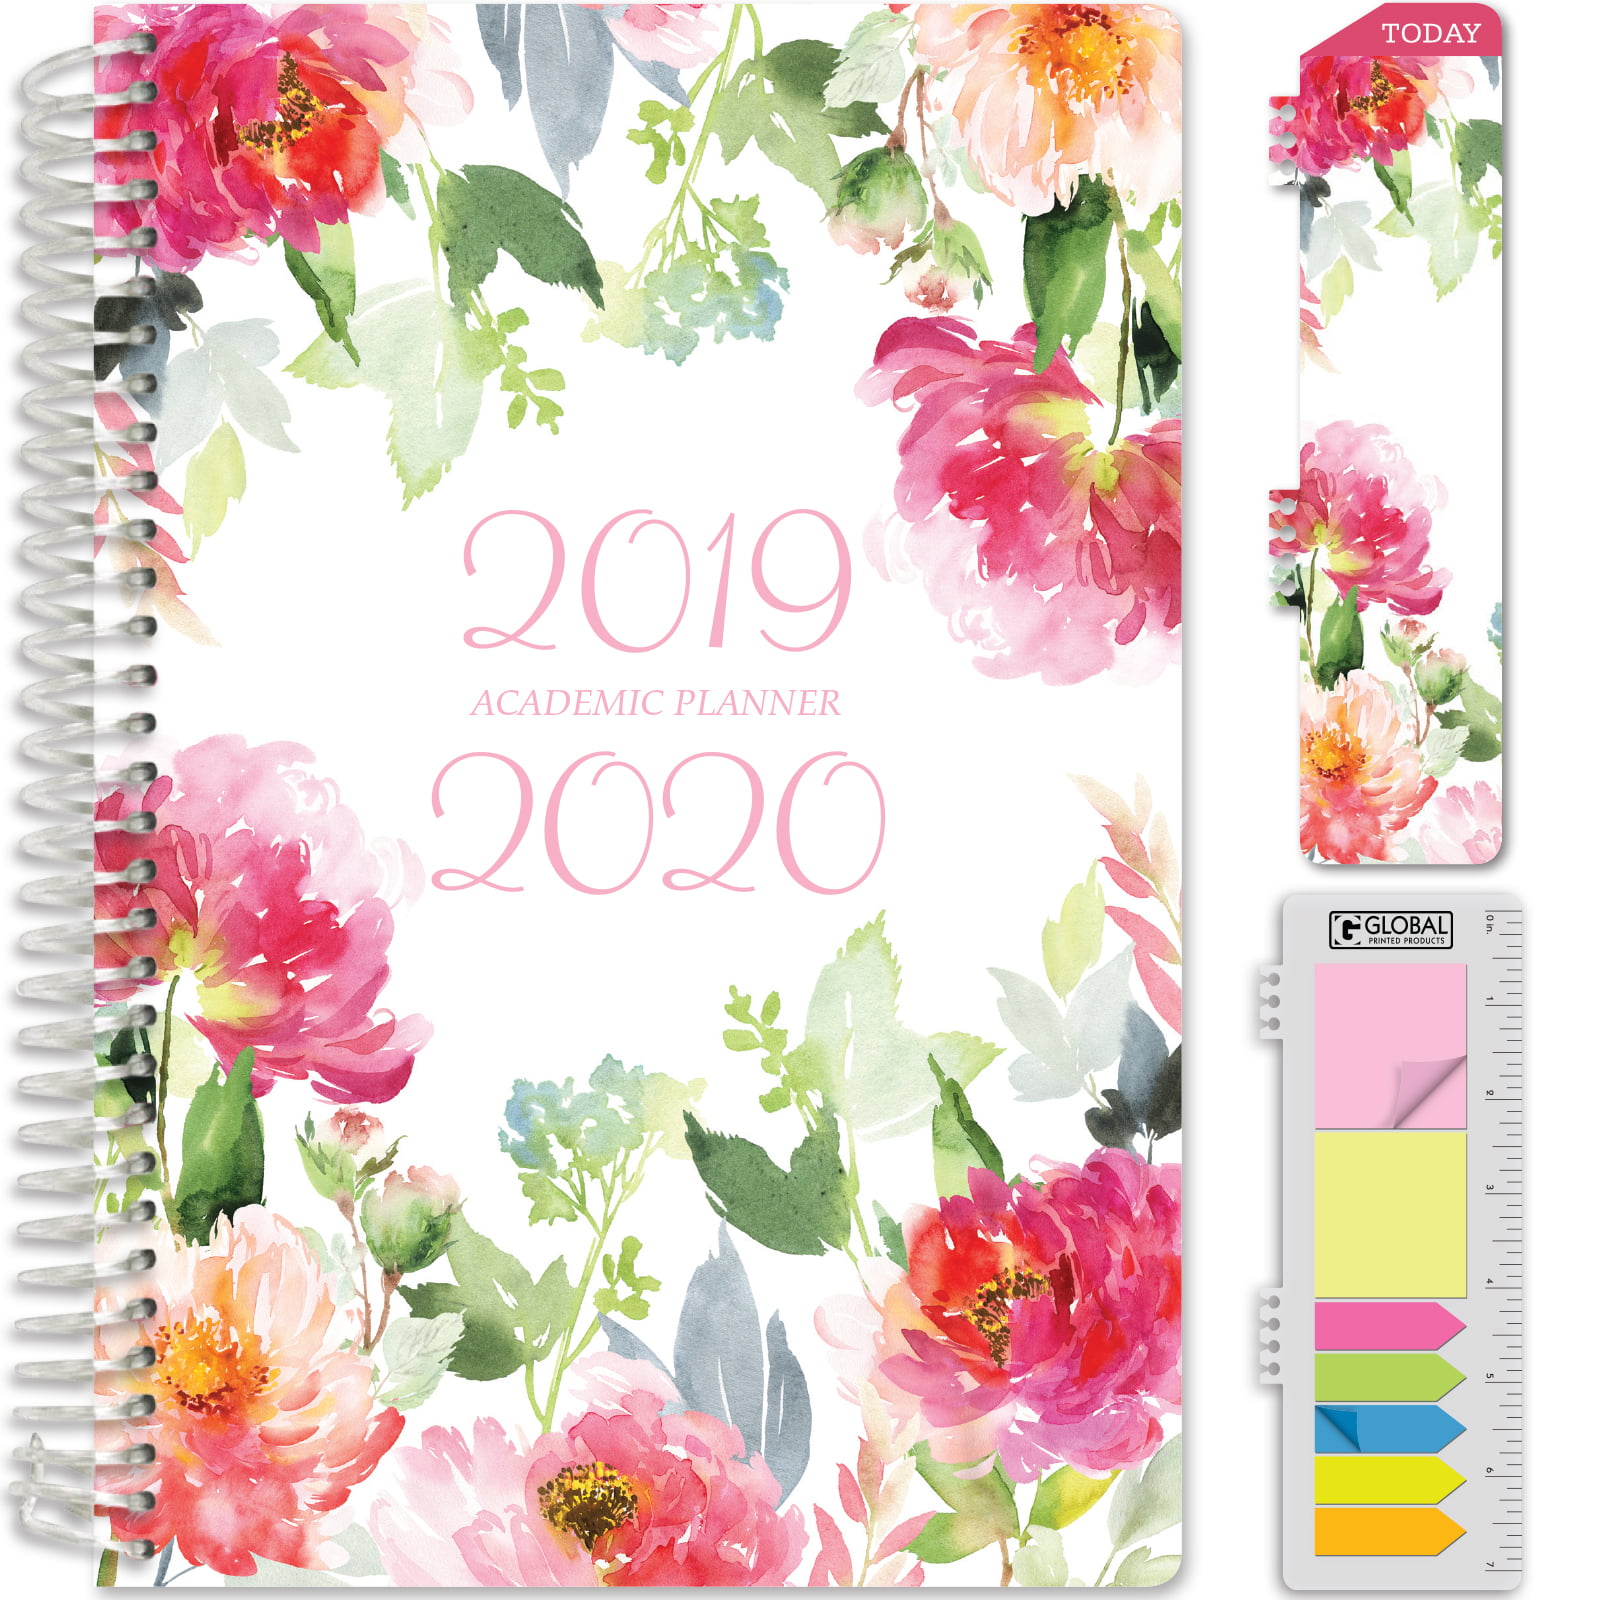 November 2021 Through December 2022 Pocket Folder and Sticky Note Set Rainbow Watercolors Bookmark 5.5x8 Daily Weekly Monthly Planner Yearly Agenda HARDCOVER 2022 Planner: 